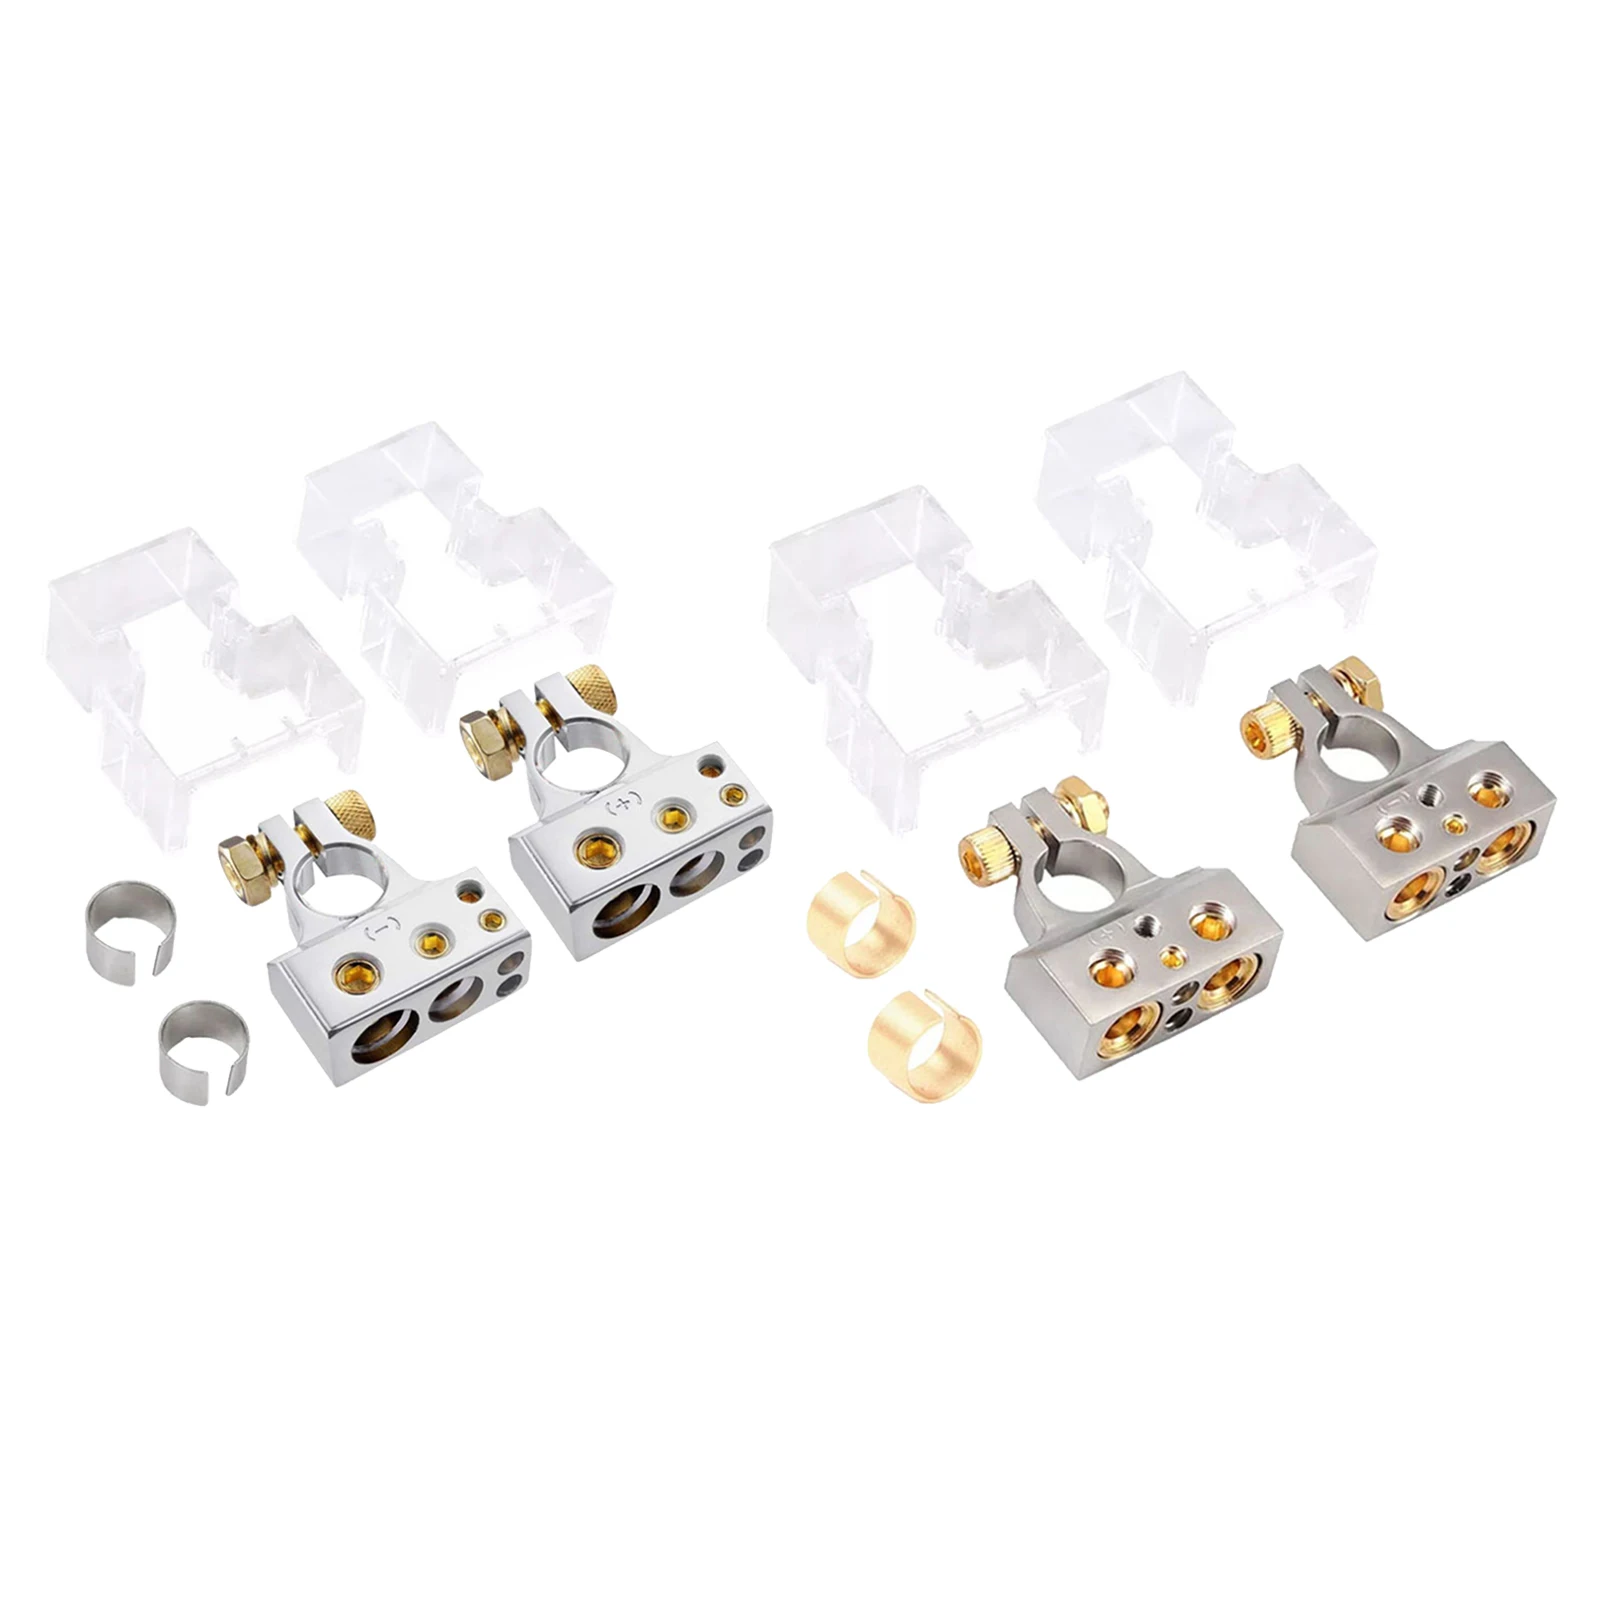 2 Packs High Quality Zinc Alloy Auto Battery Terminal Clips & 2 Clear Covers